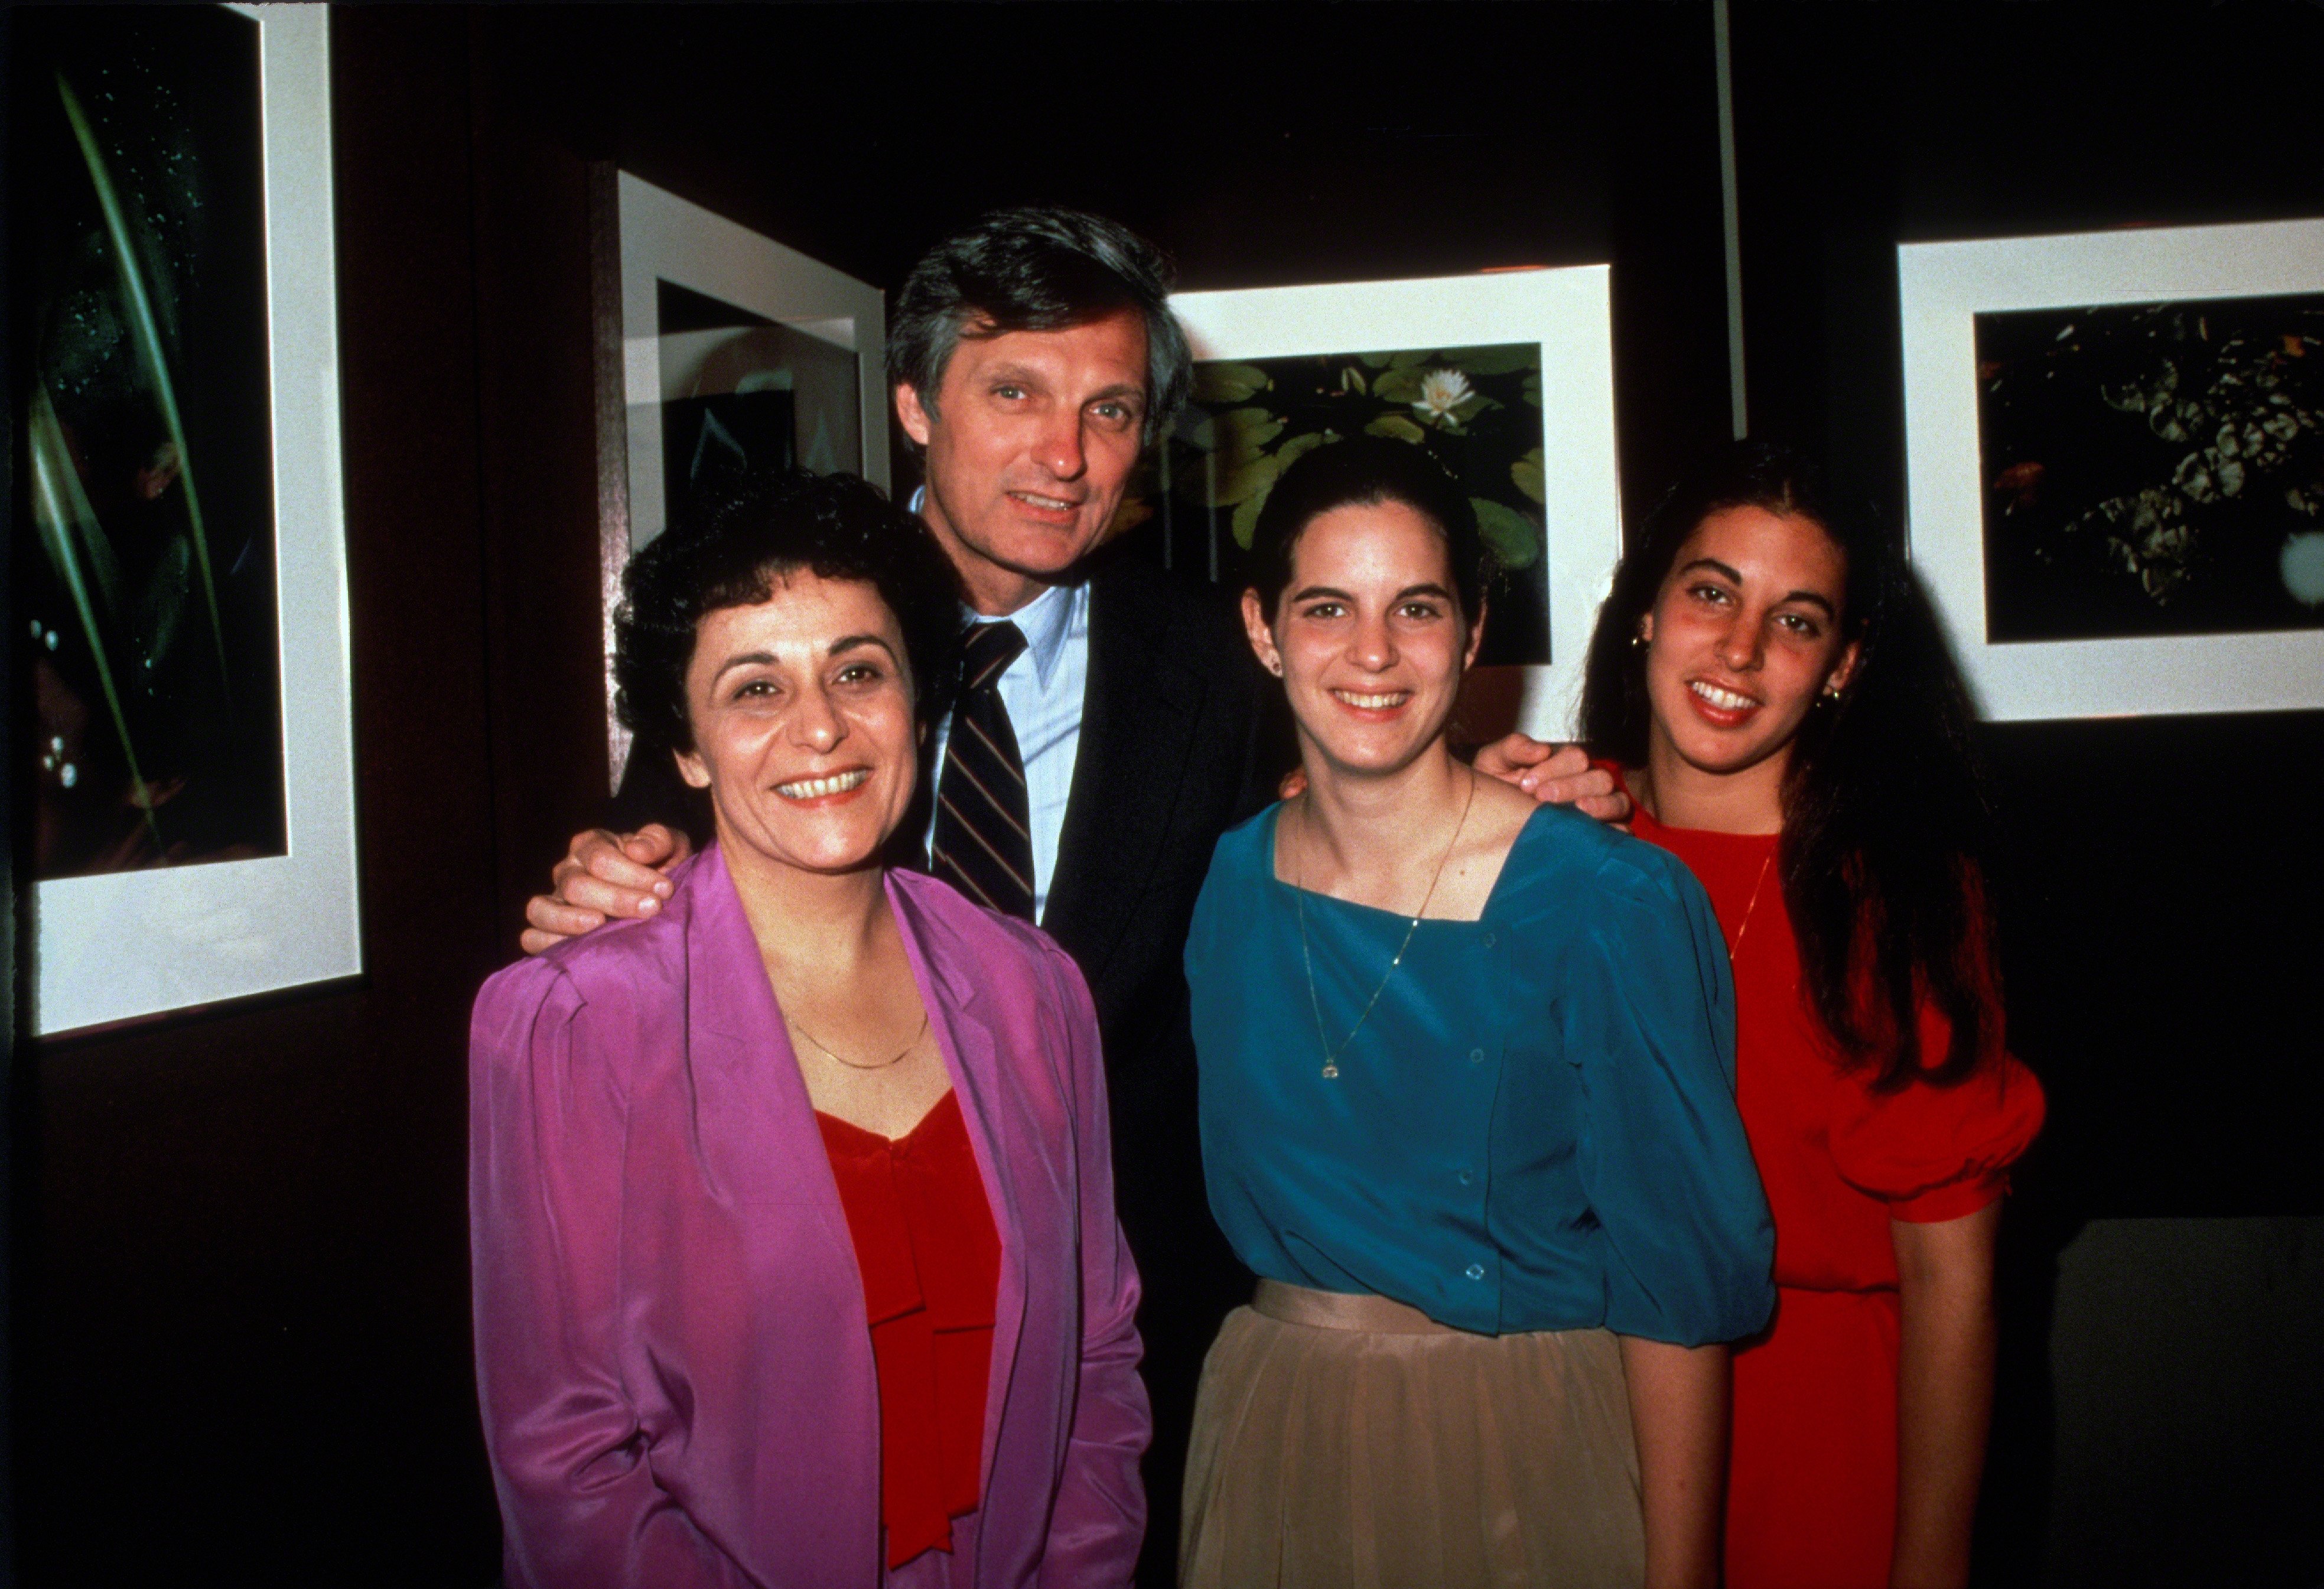 Alan Alda with Arlene Alda and daughters, Elizabeth, Beatrice and Eve on January 1, 1981 in New York City ┃Source: Getty Images